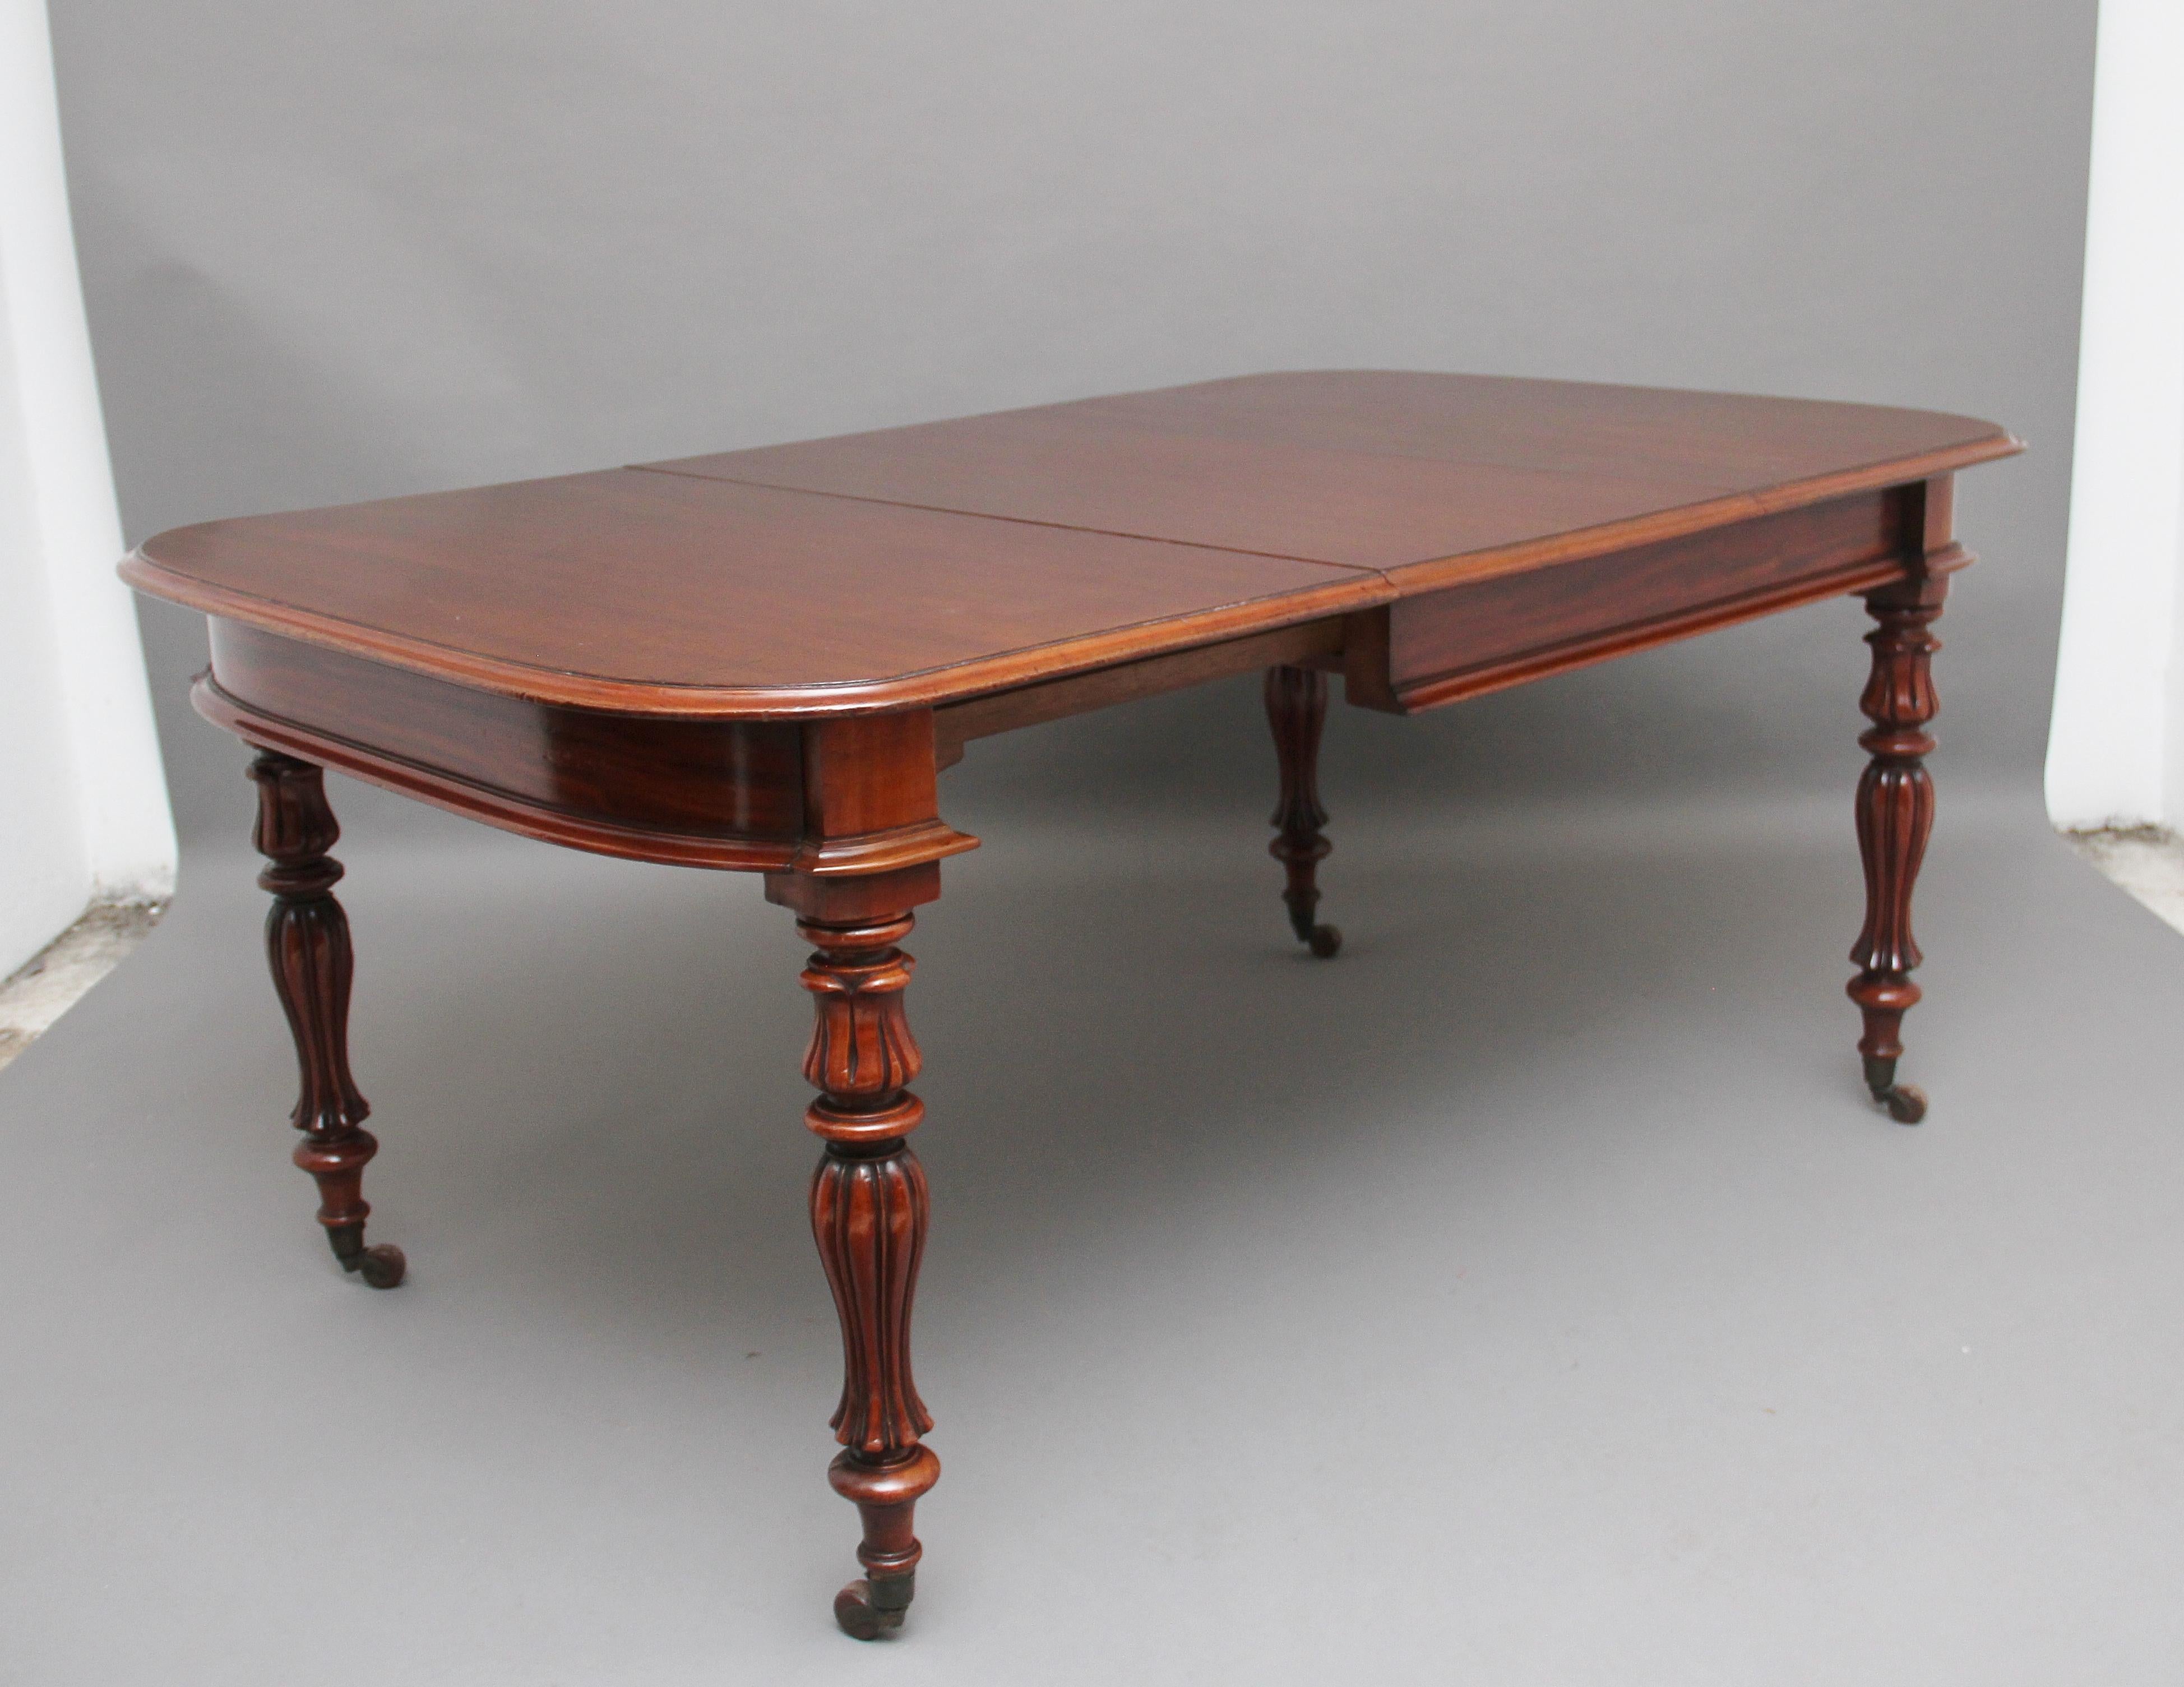 19th century mahogany one leaf dining table, the solid moulded edge top with rounded corners above a deep frieze with moulded edge, supported on elegant carved turned legs with carved tulip design at the top of the leg, terminating on brass caps and